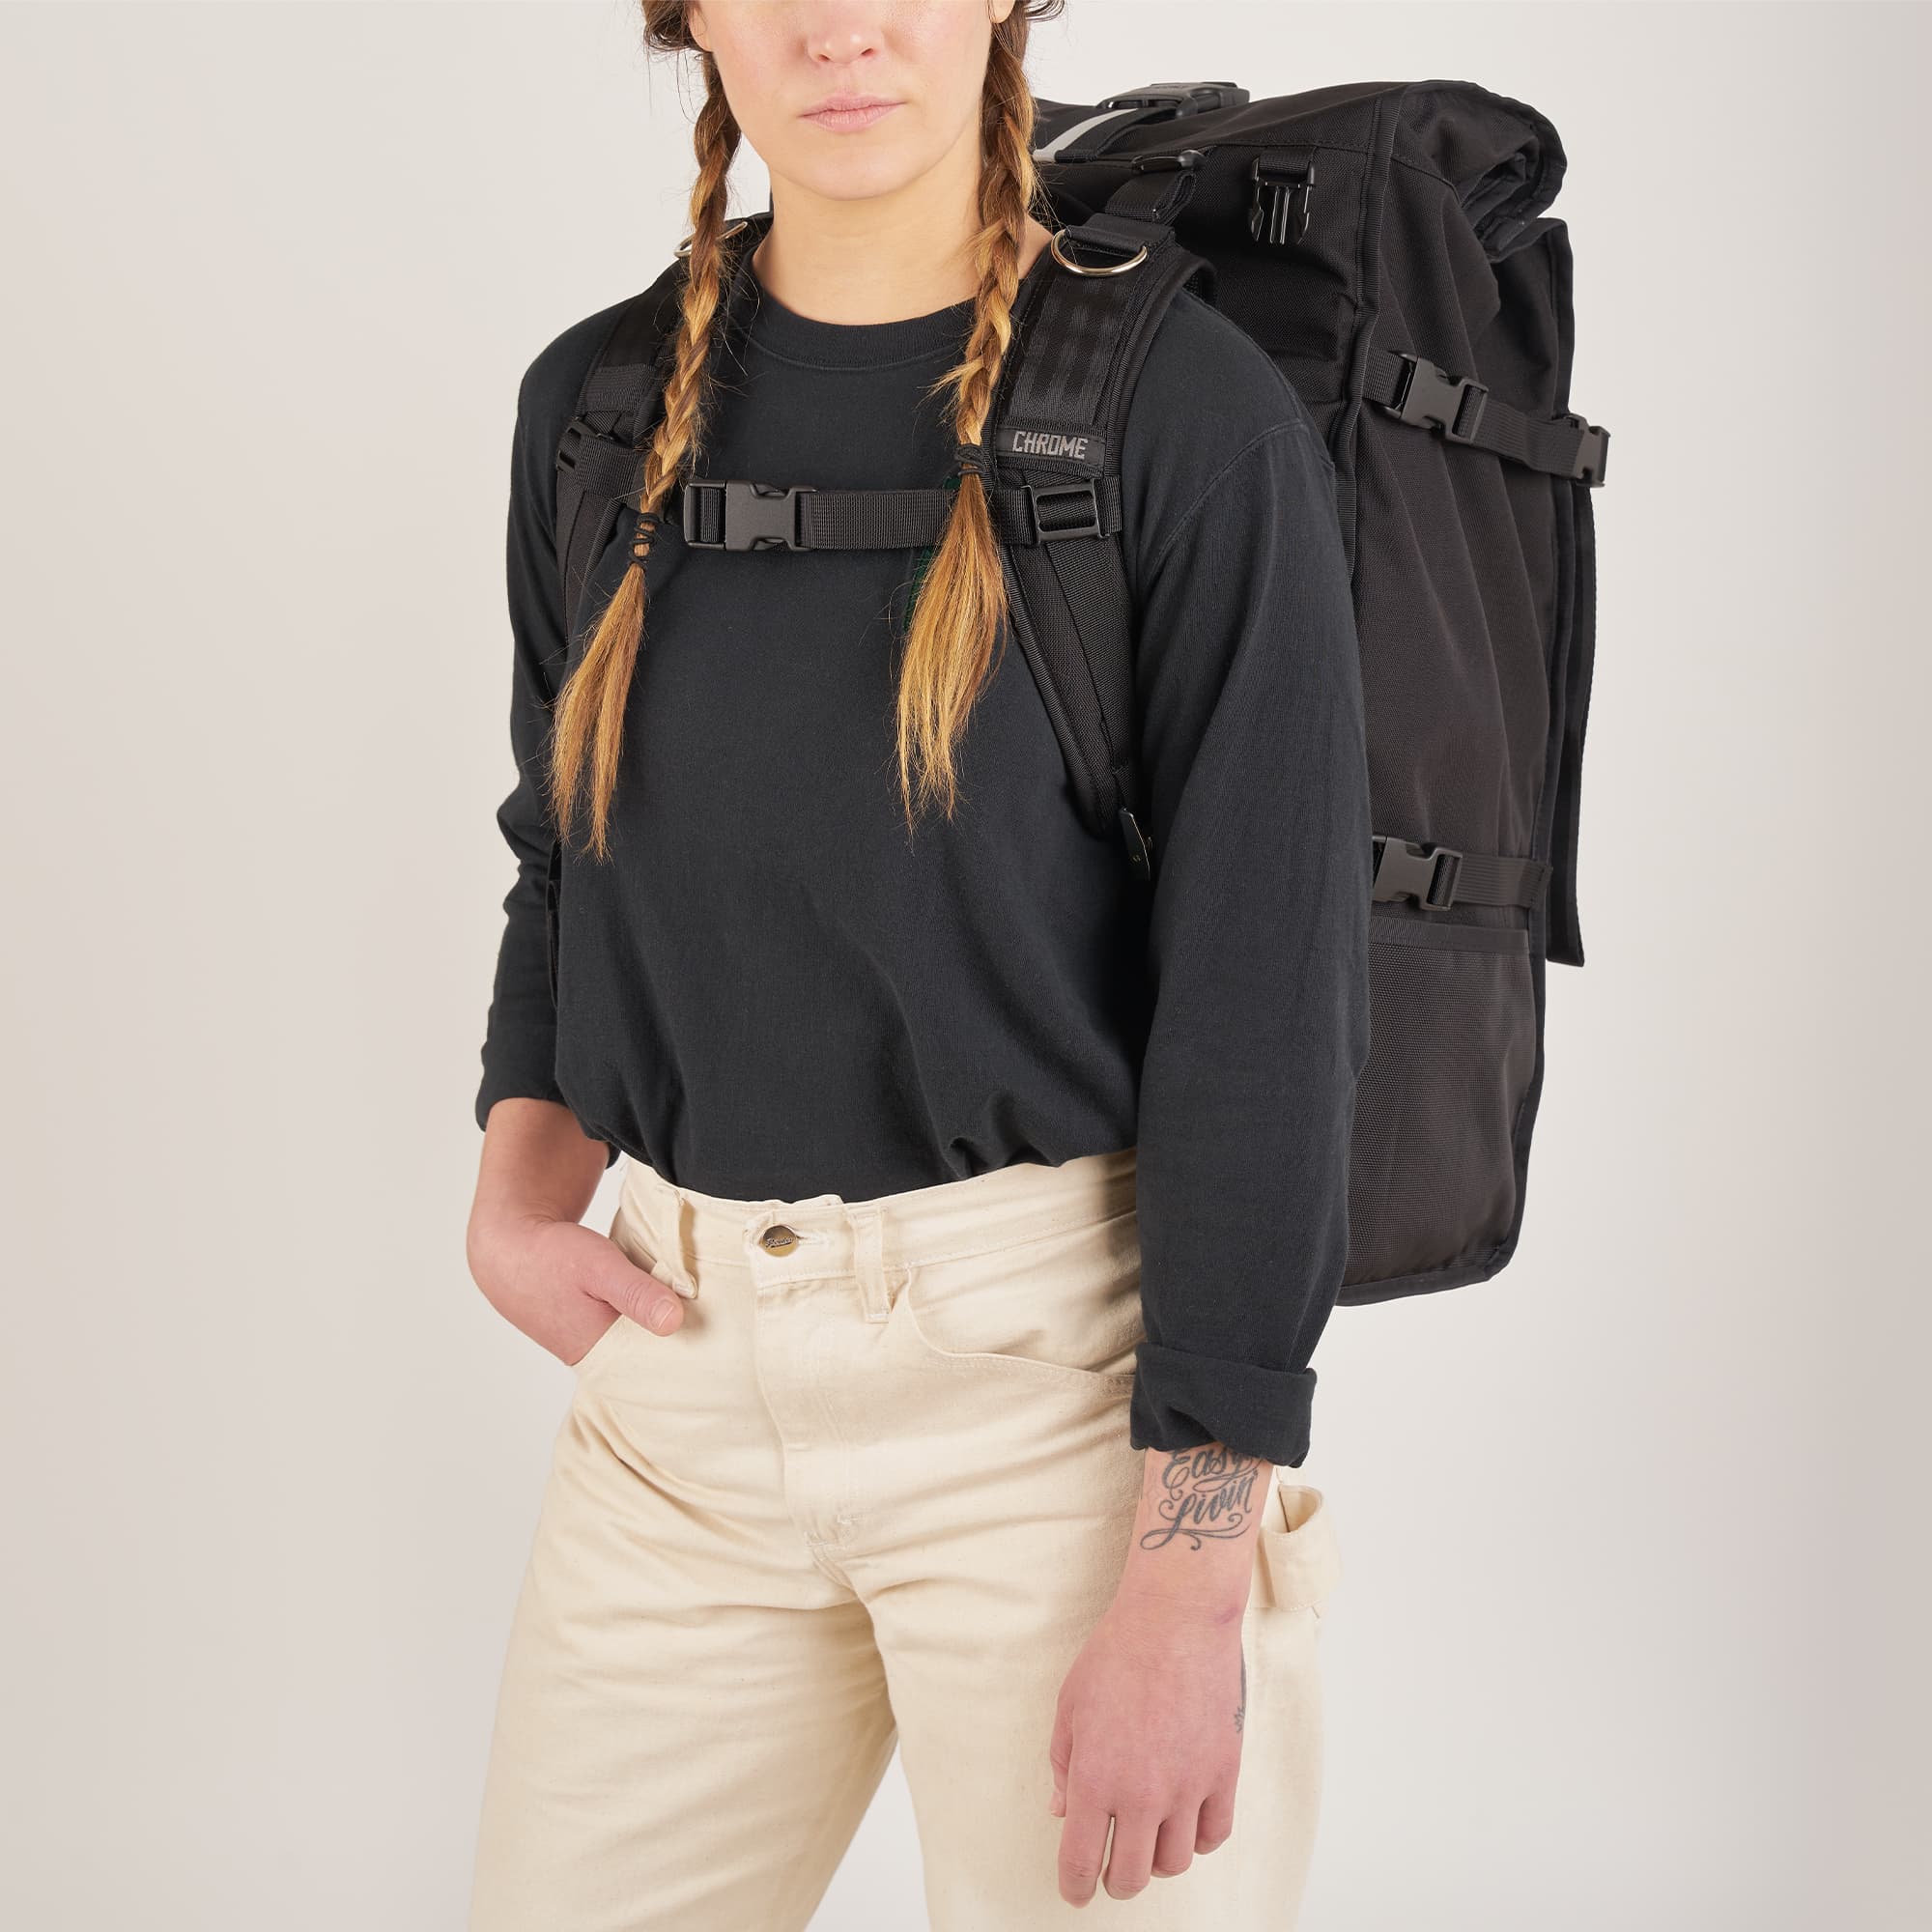 80L Barrage Pro backpack in black worn by a woman front view #color_black/red